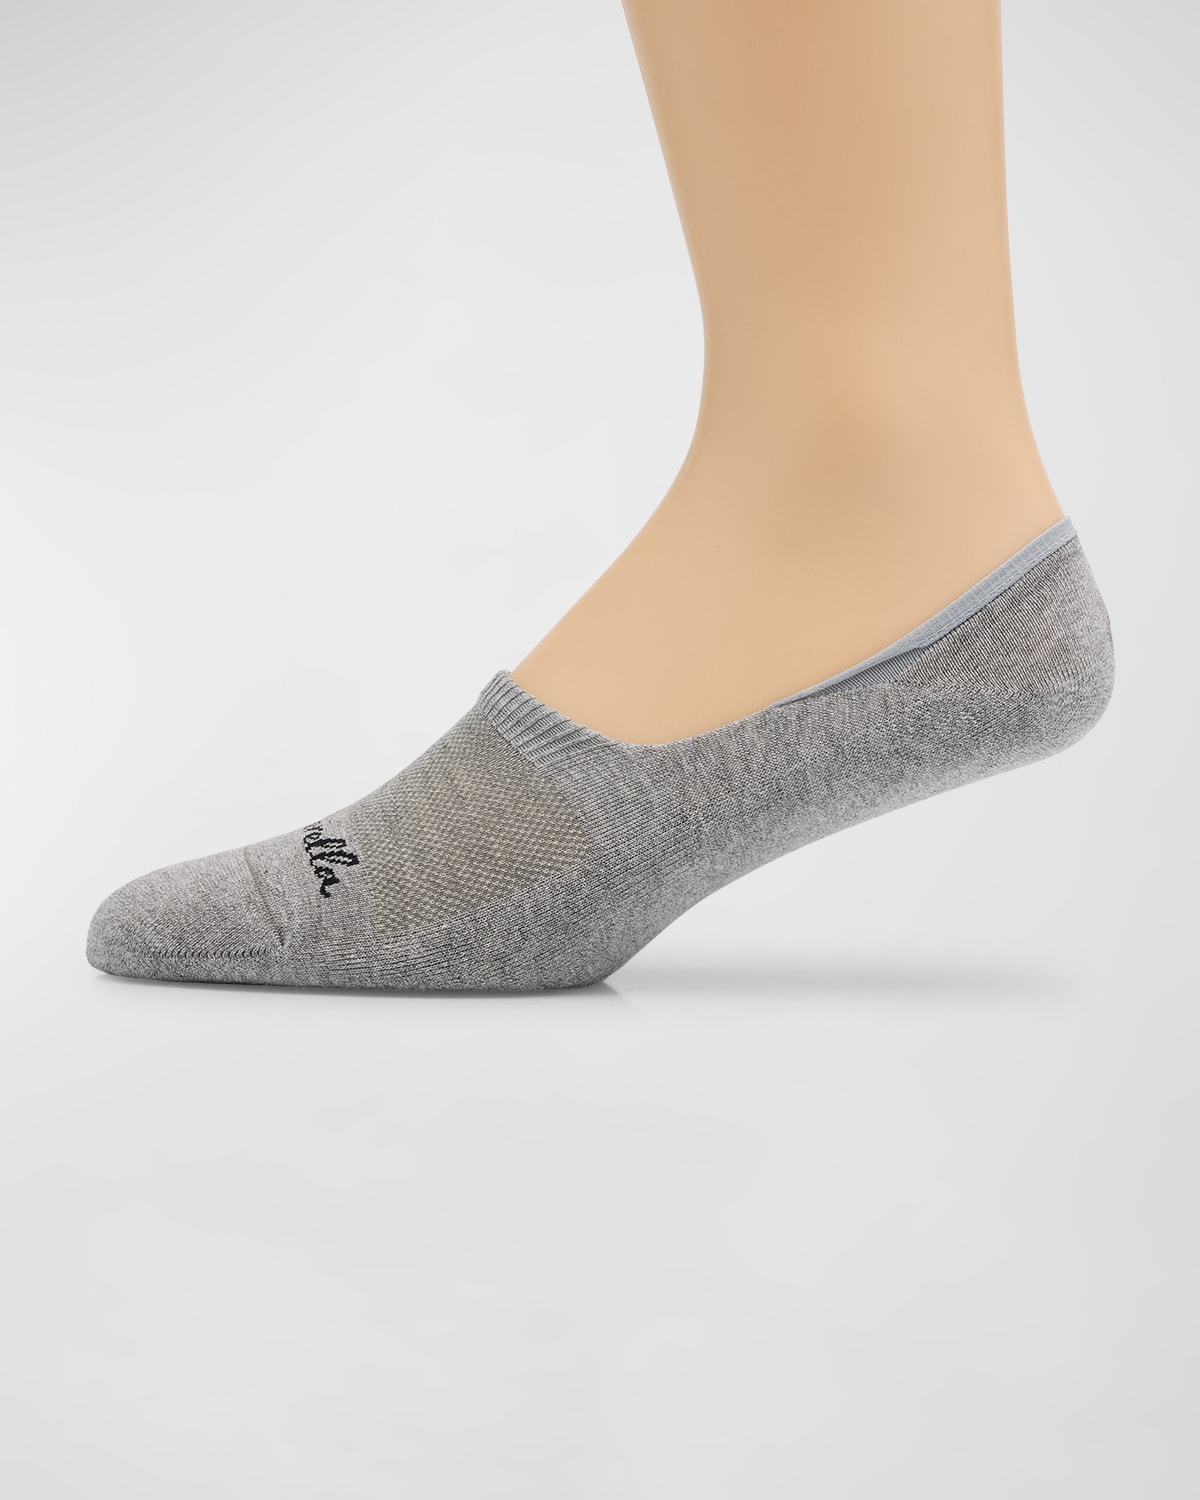 Pantherella Men's Invisible Cushion Sole No-show Socks In Gray